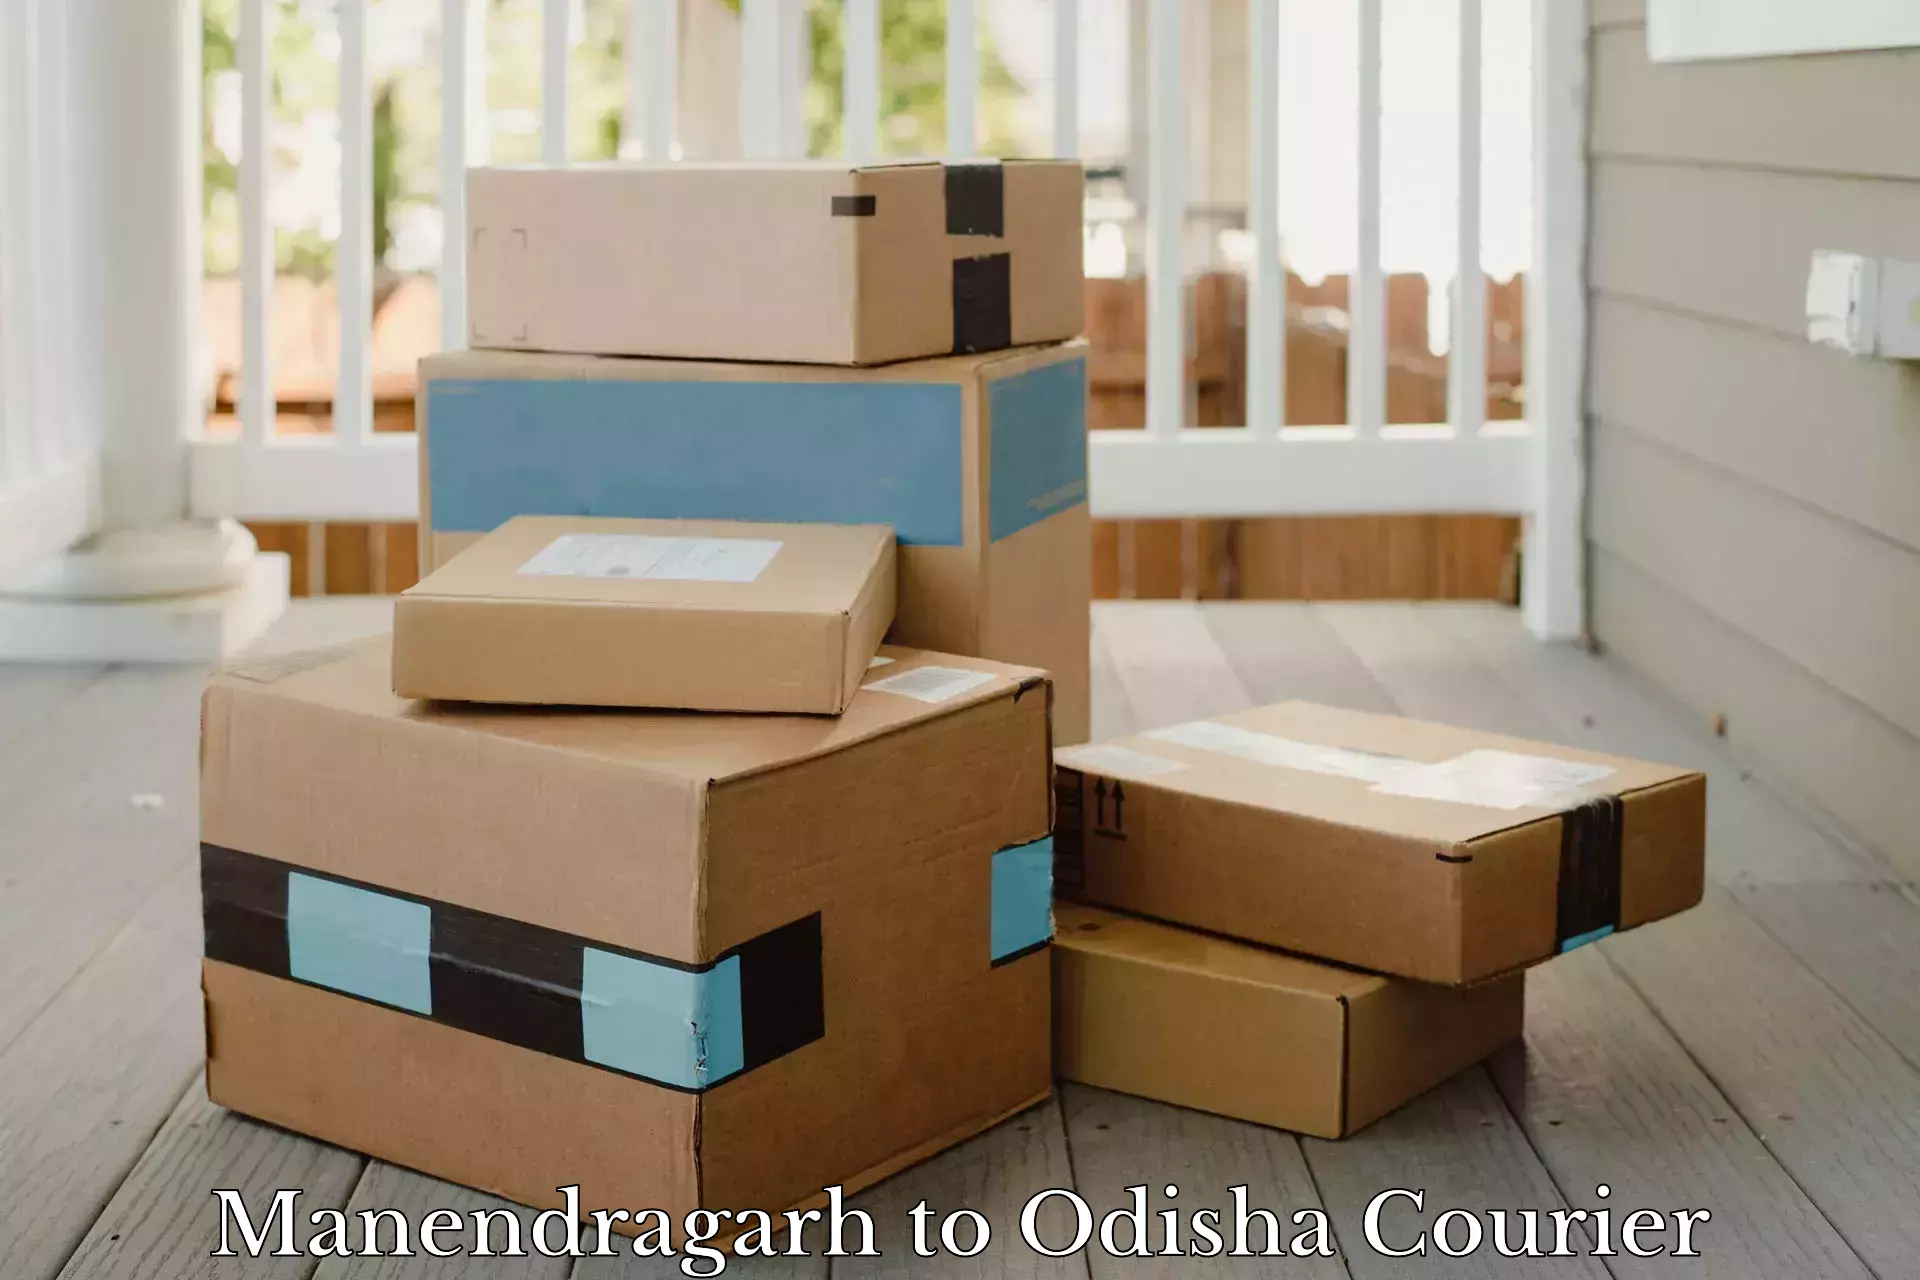 Large-scale shipping solutions Manendragarh to Patkura